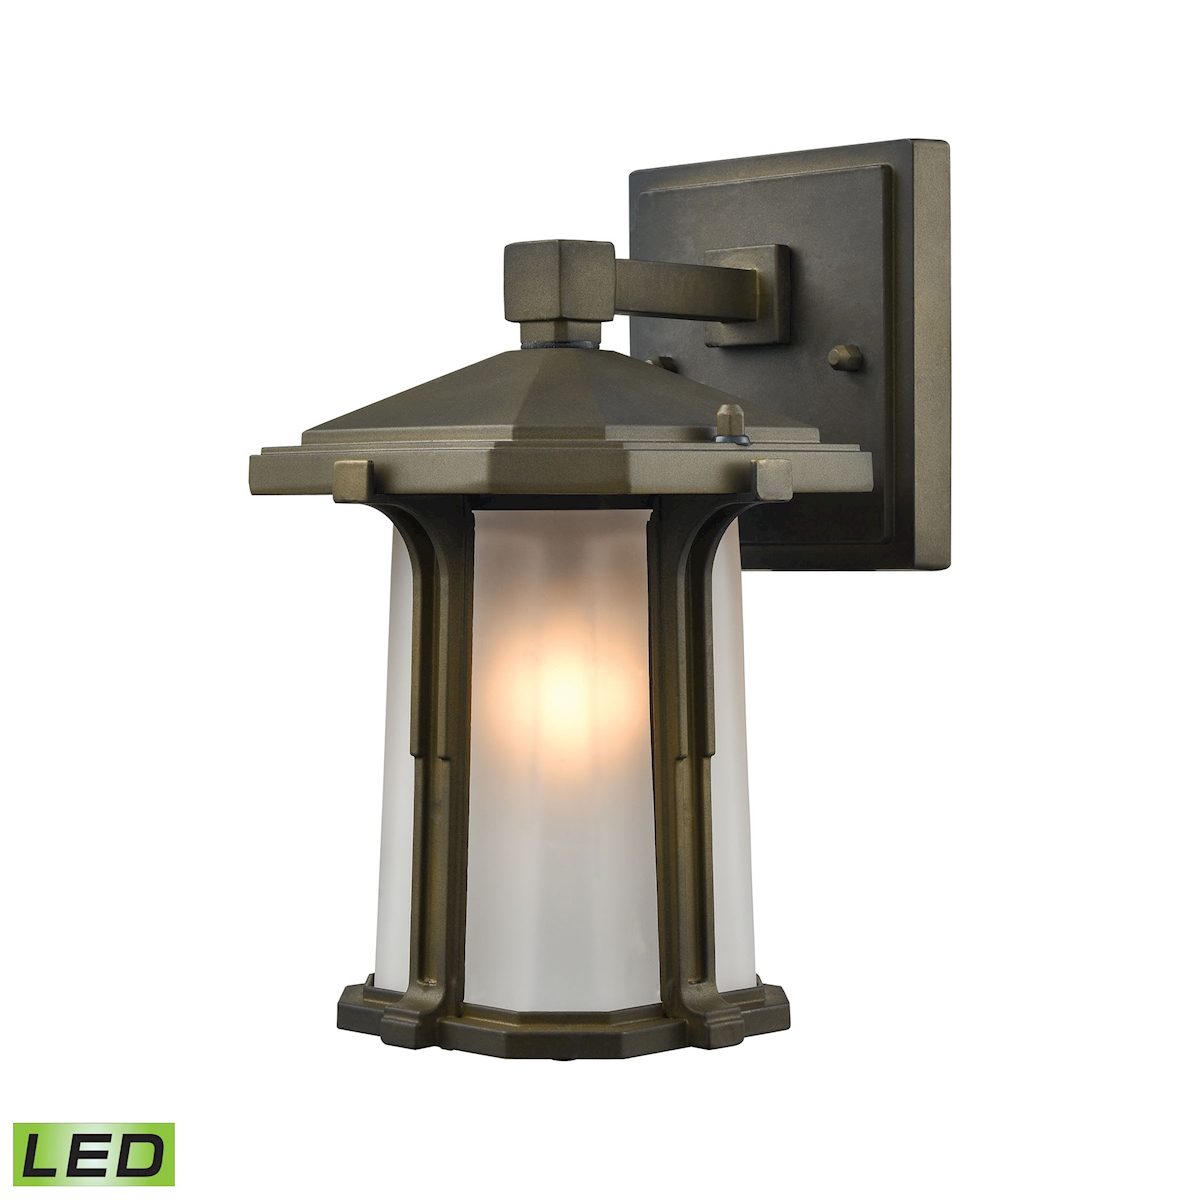 Brighton 1-Light Outdoor Wall Lamp in Smoked Bronze - Includes LED Bulb_EL-87090/1-LED